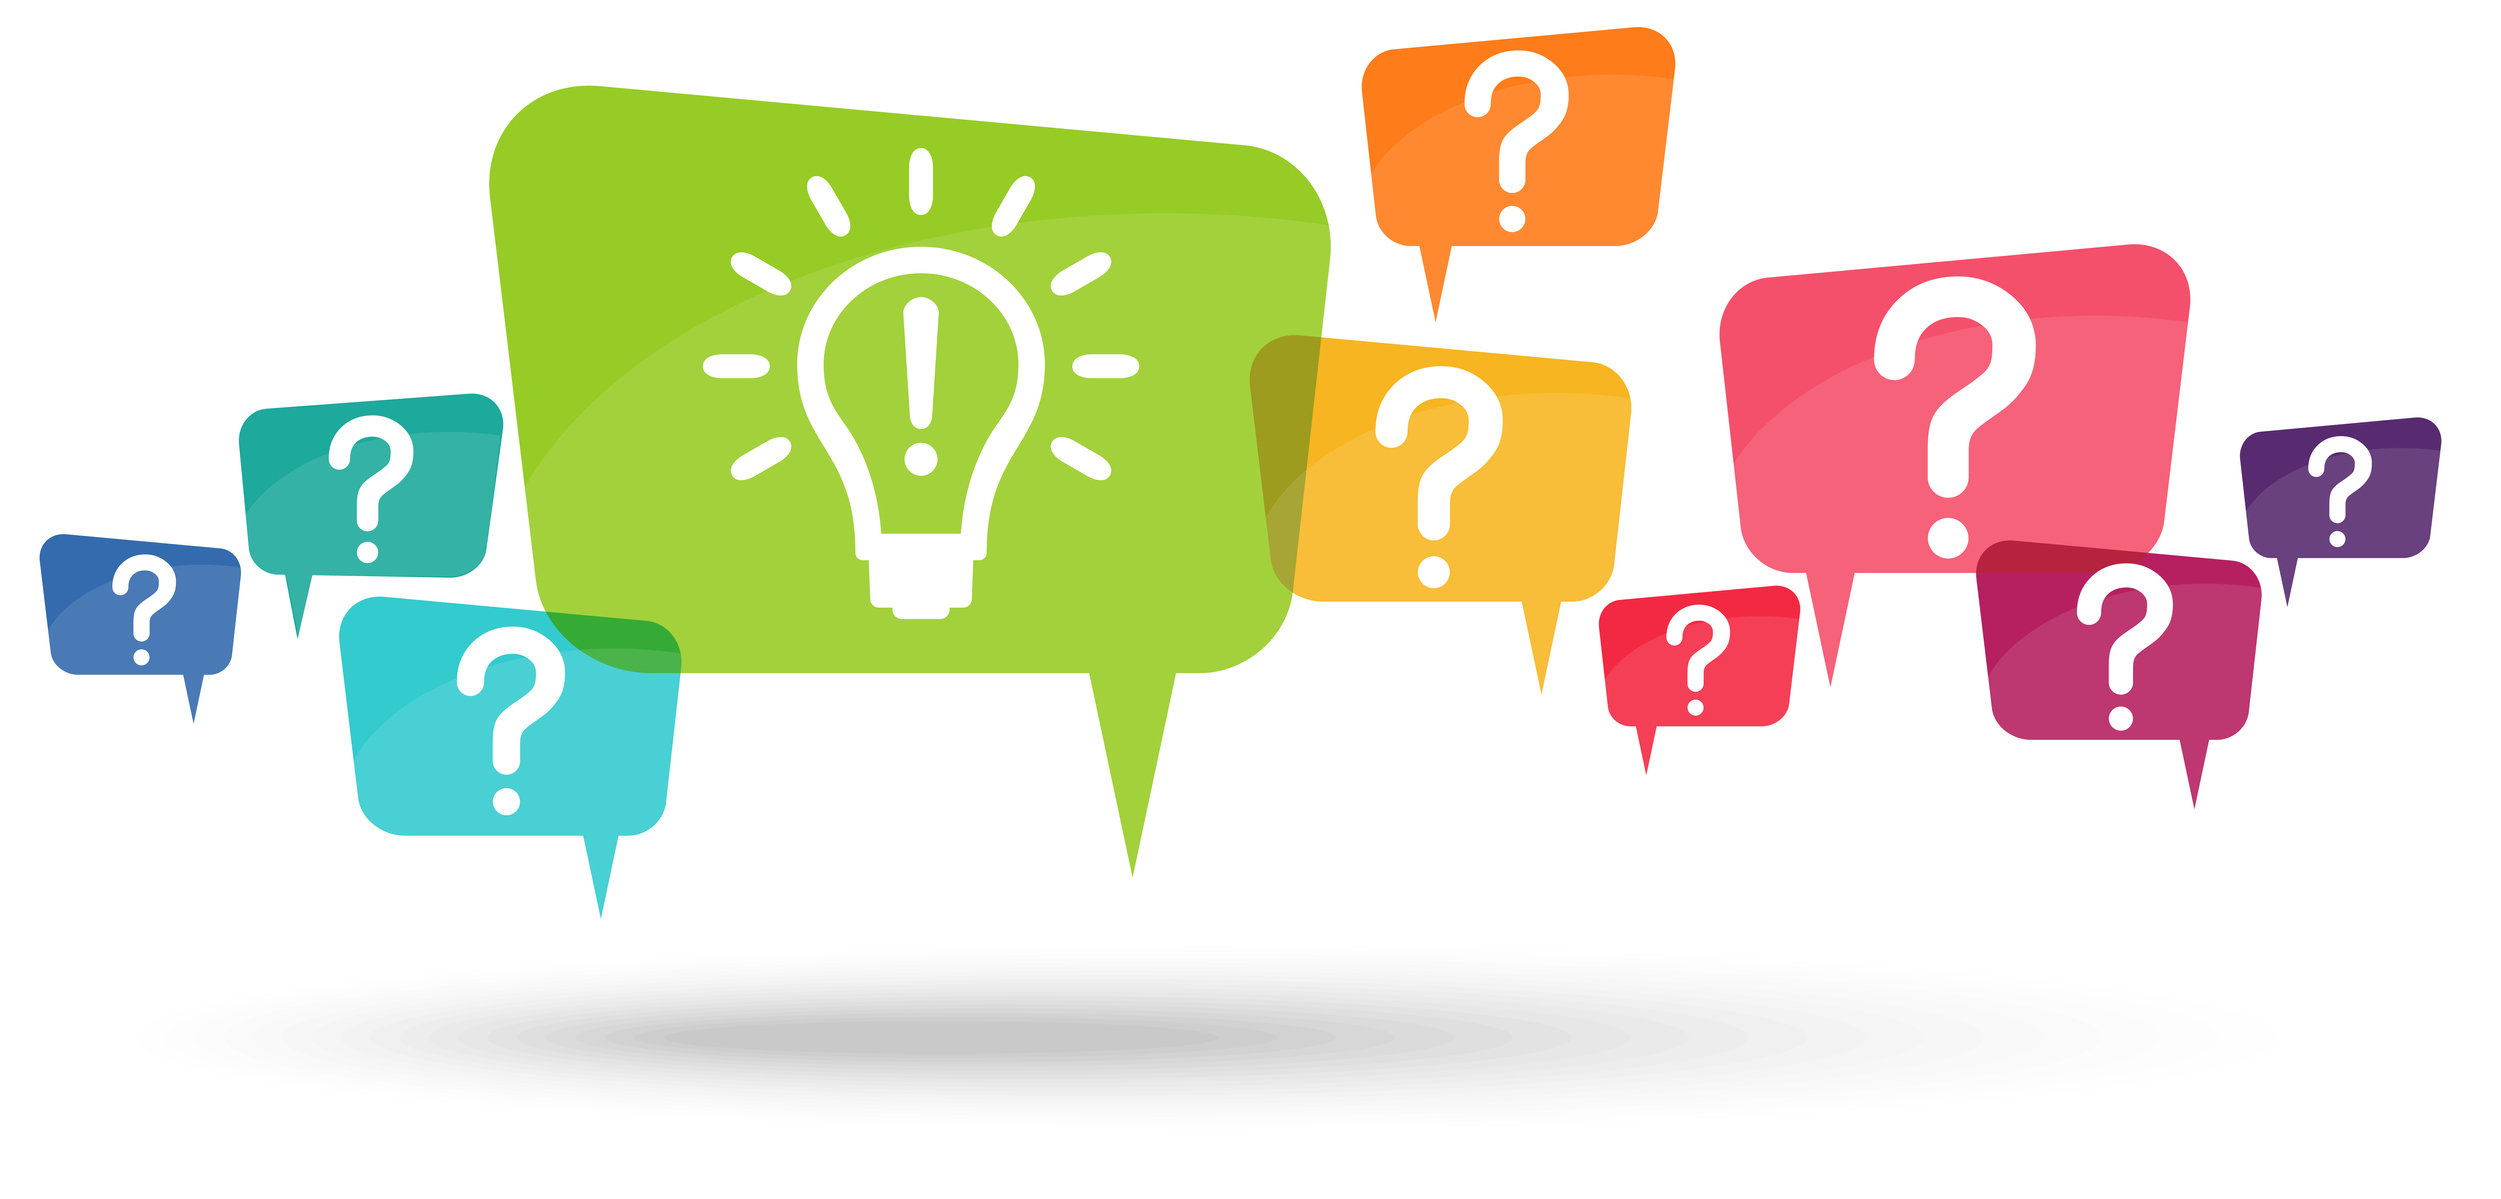 Speech bubbles with colored question marks and with green light bulb symbolizing idea or solution